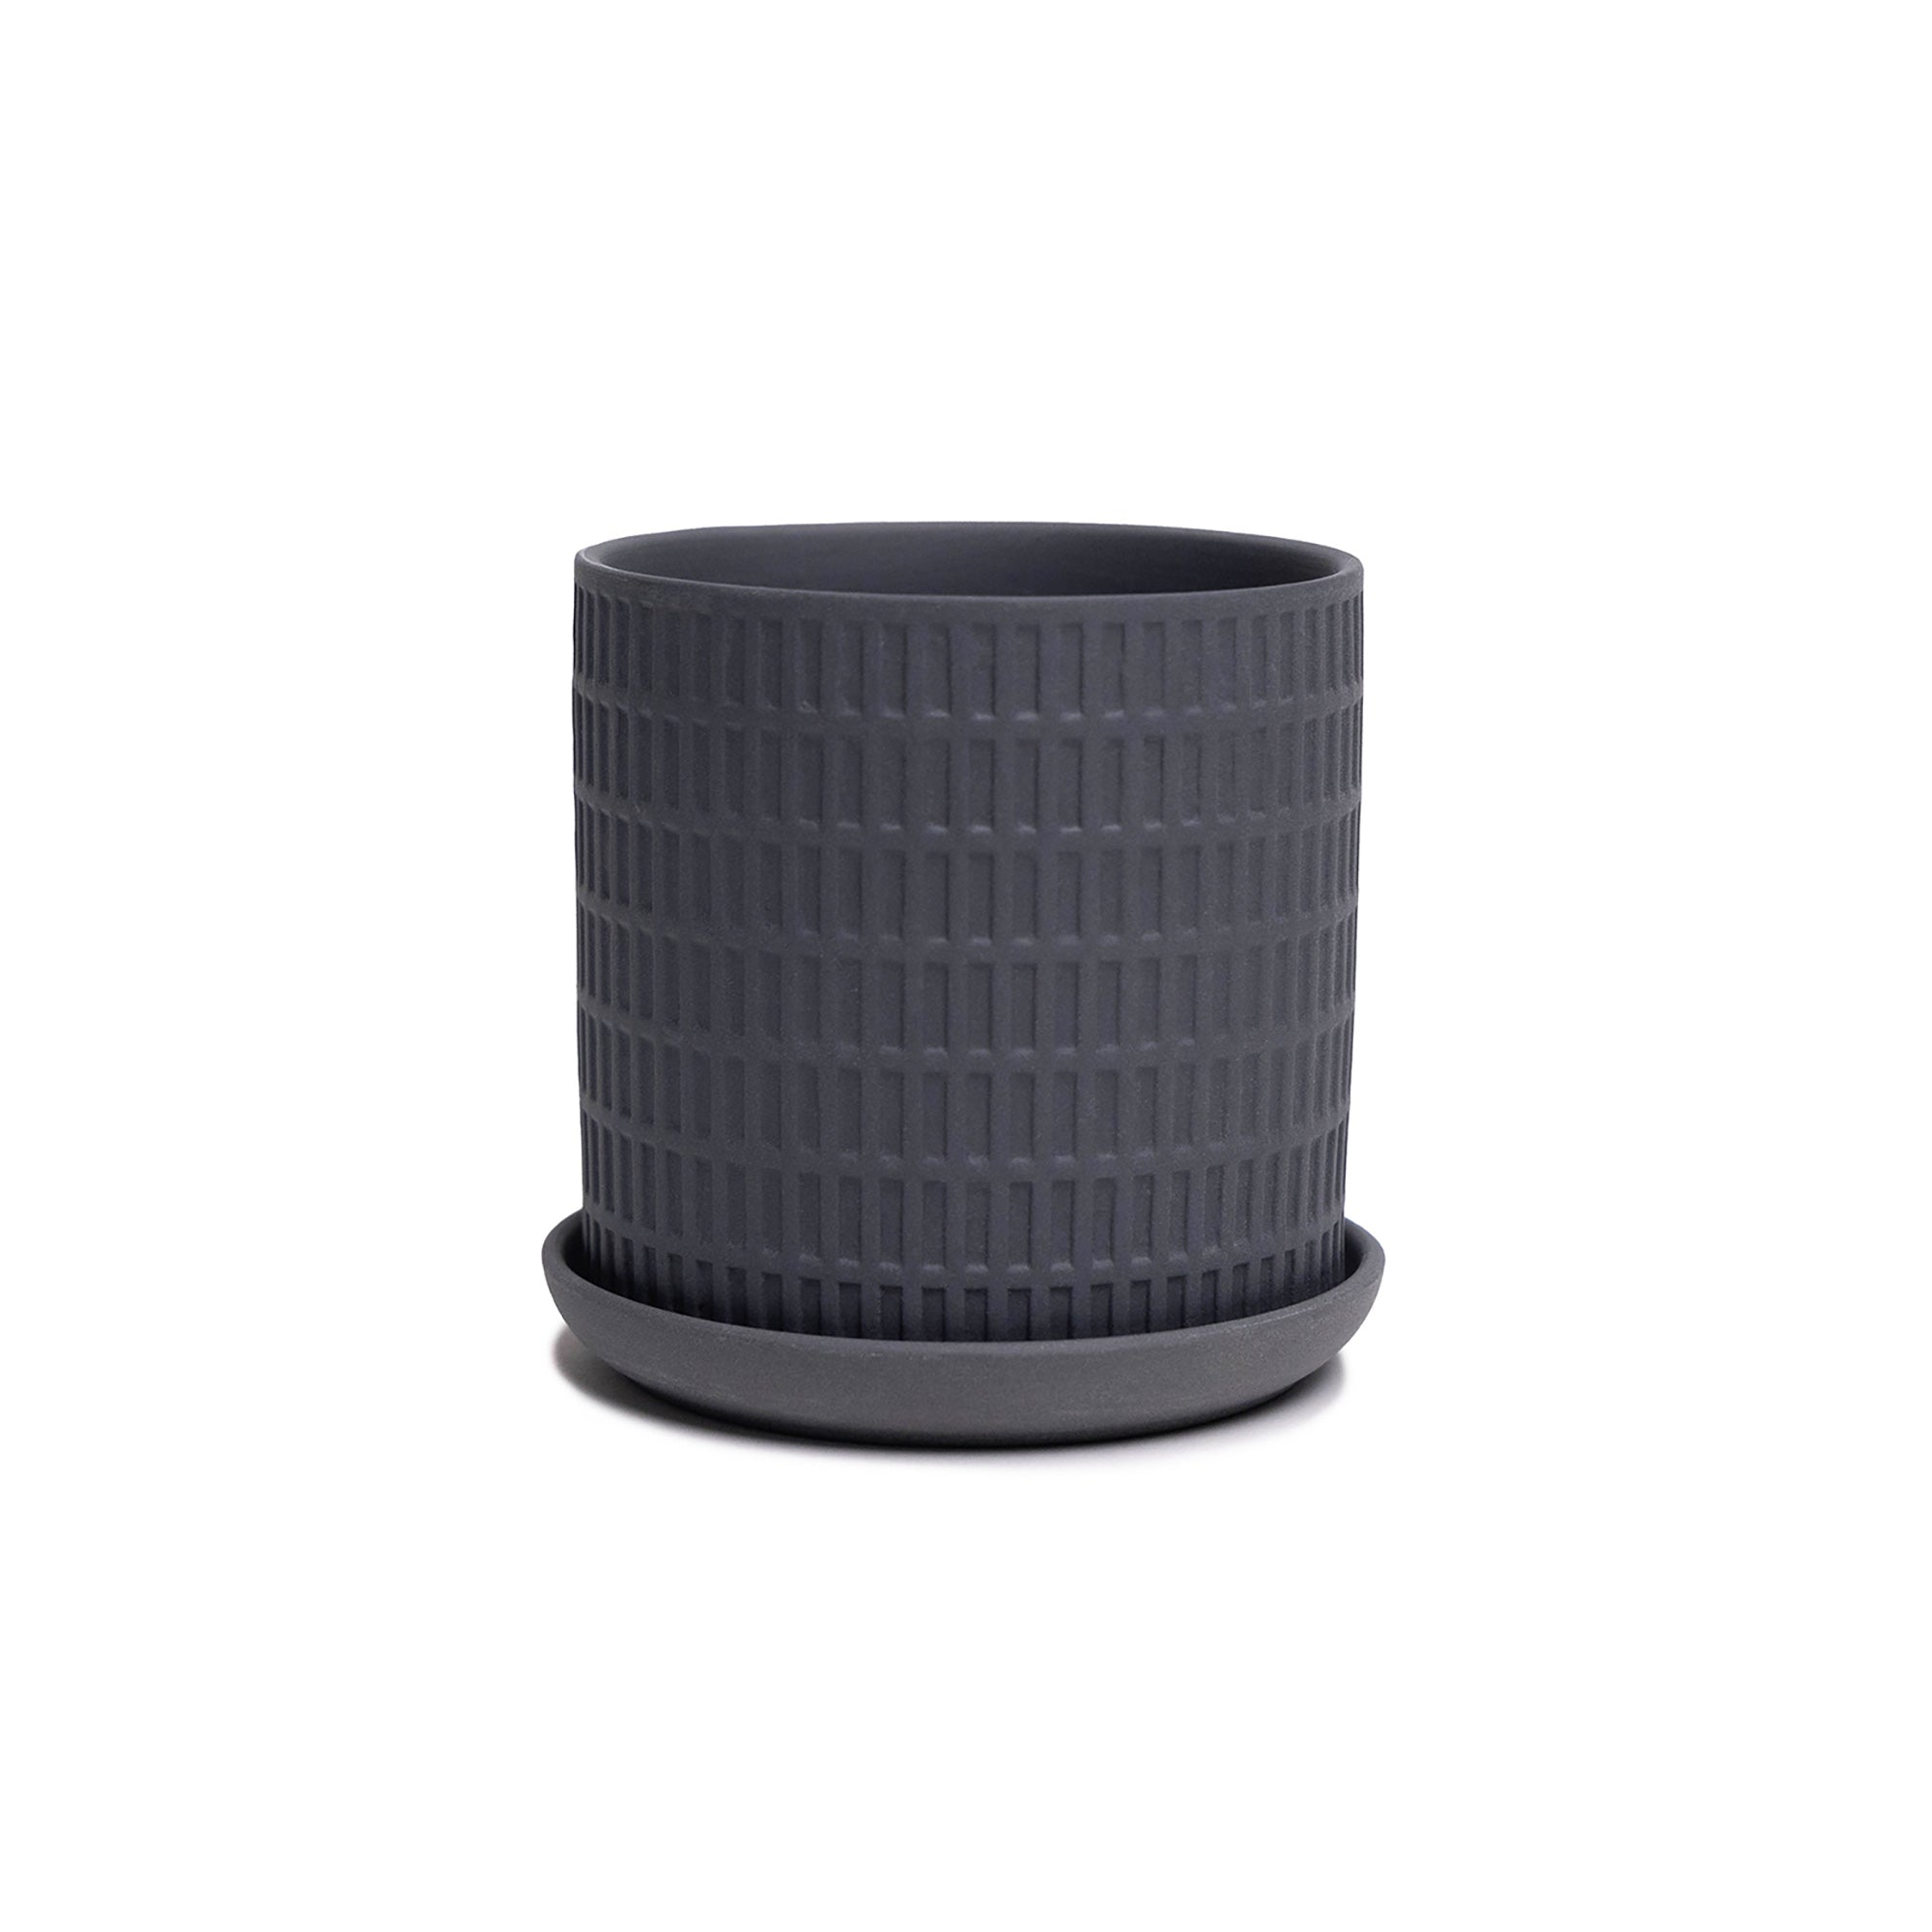 A black cylindrical Virago 3.5" Porcelain Pot with drainage hole and saucer, isolated on a white background.